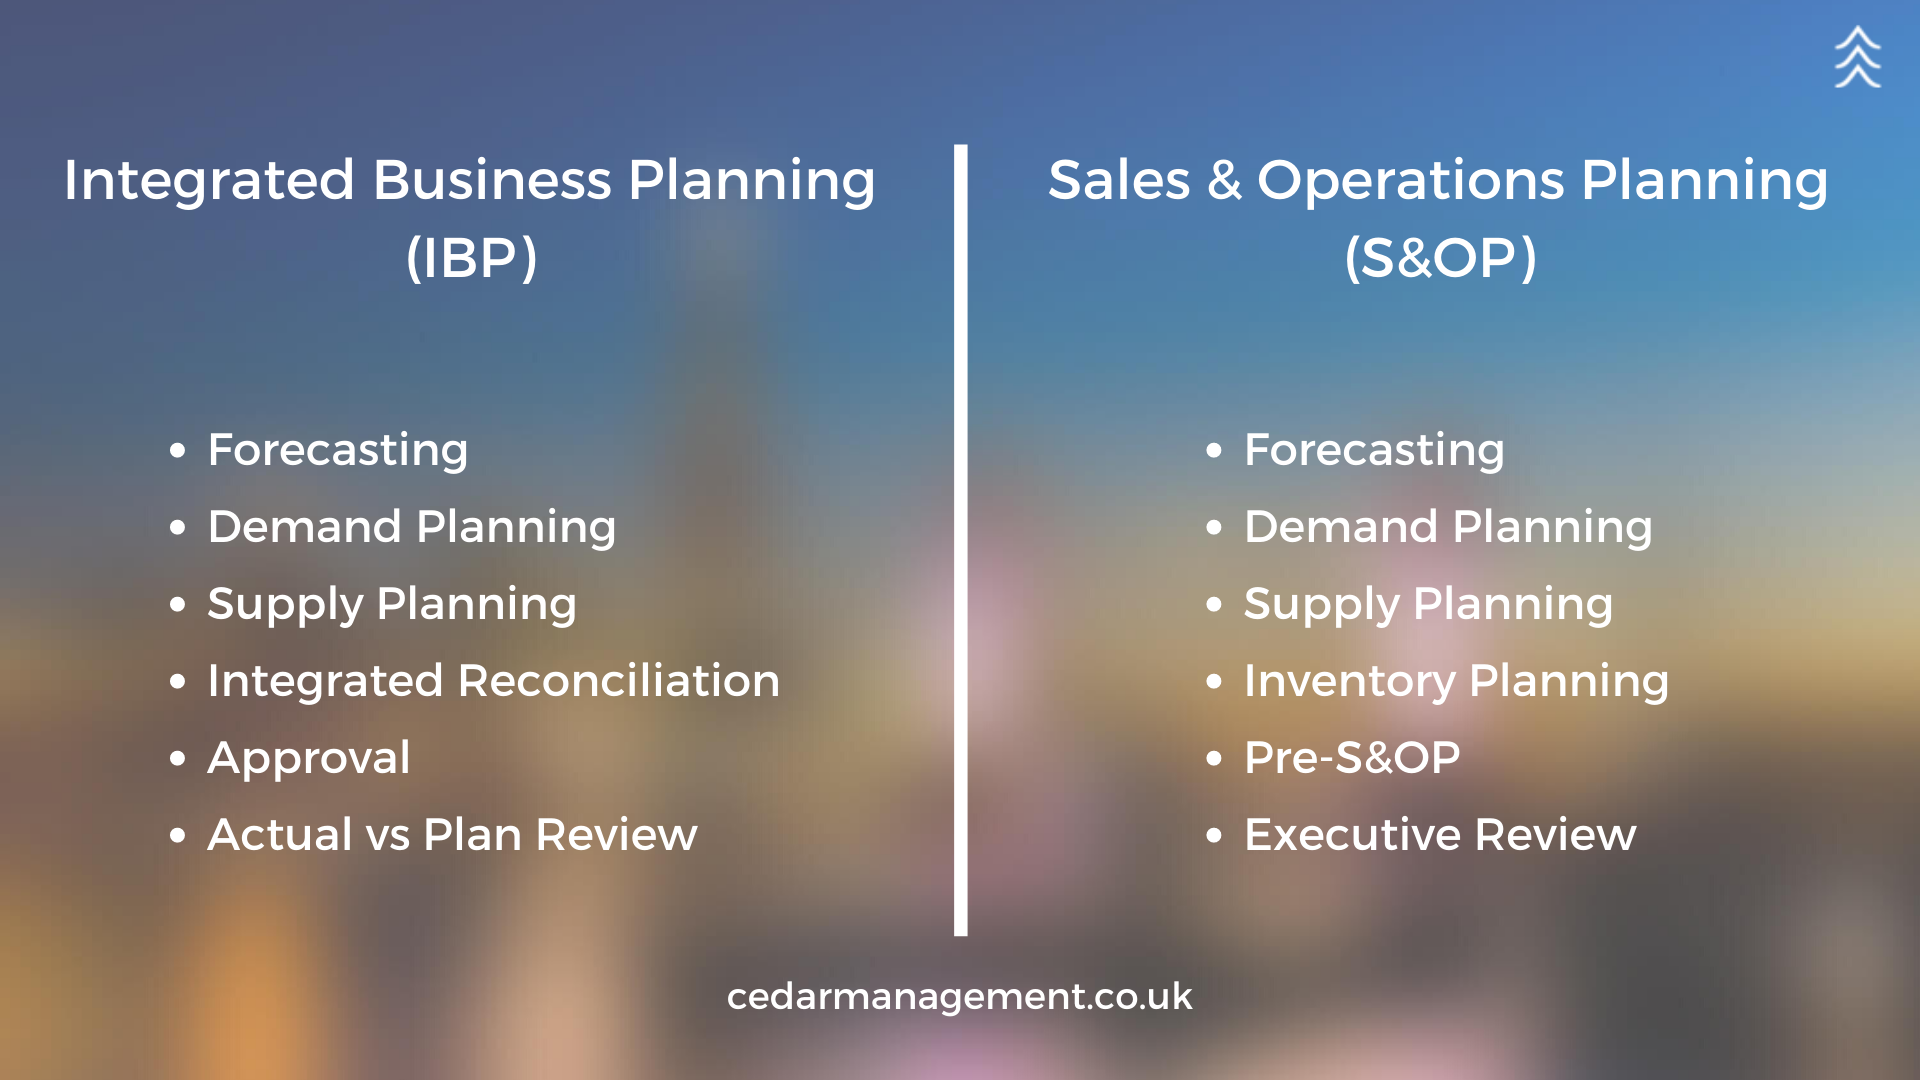 sales and operations planning vs integrated business planning